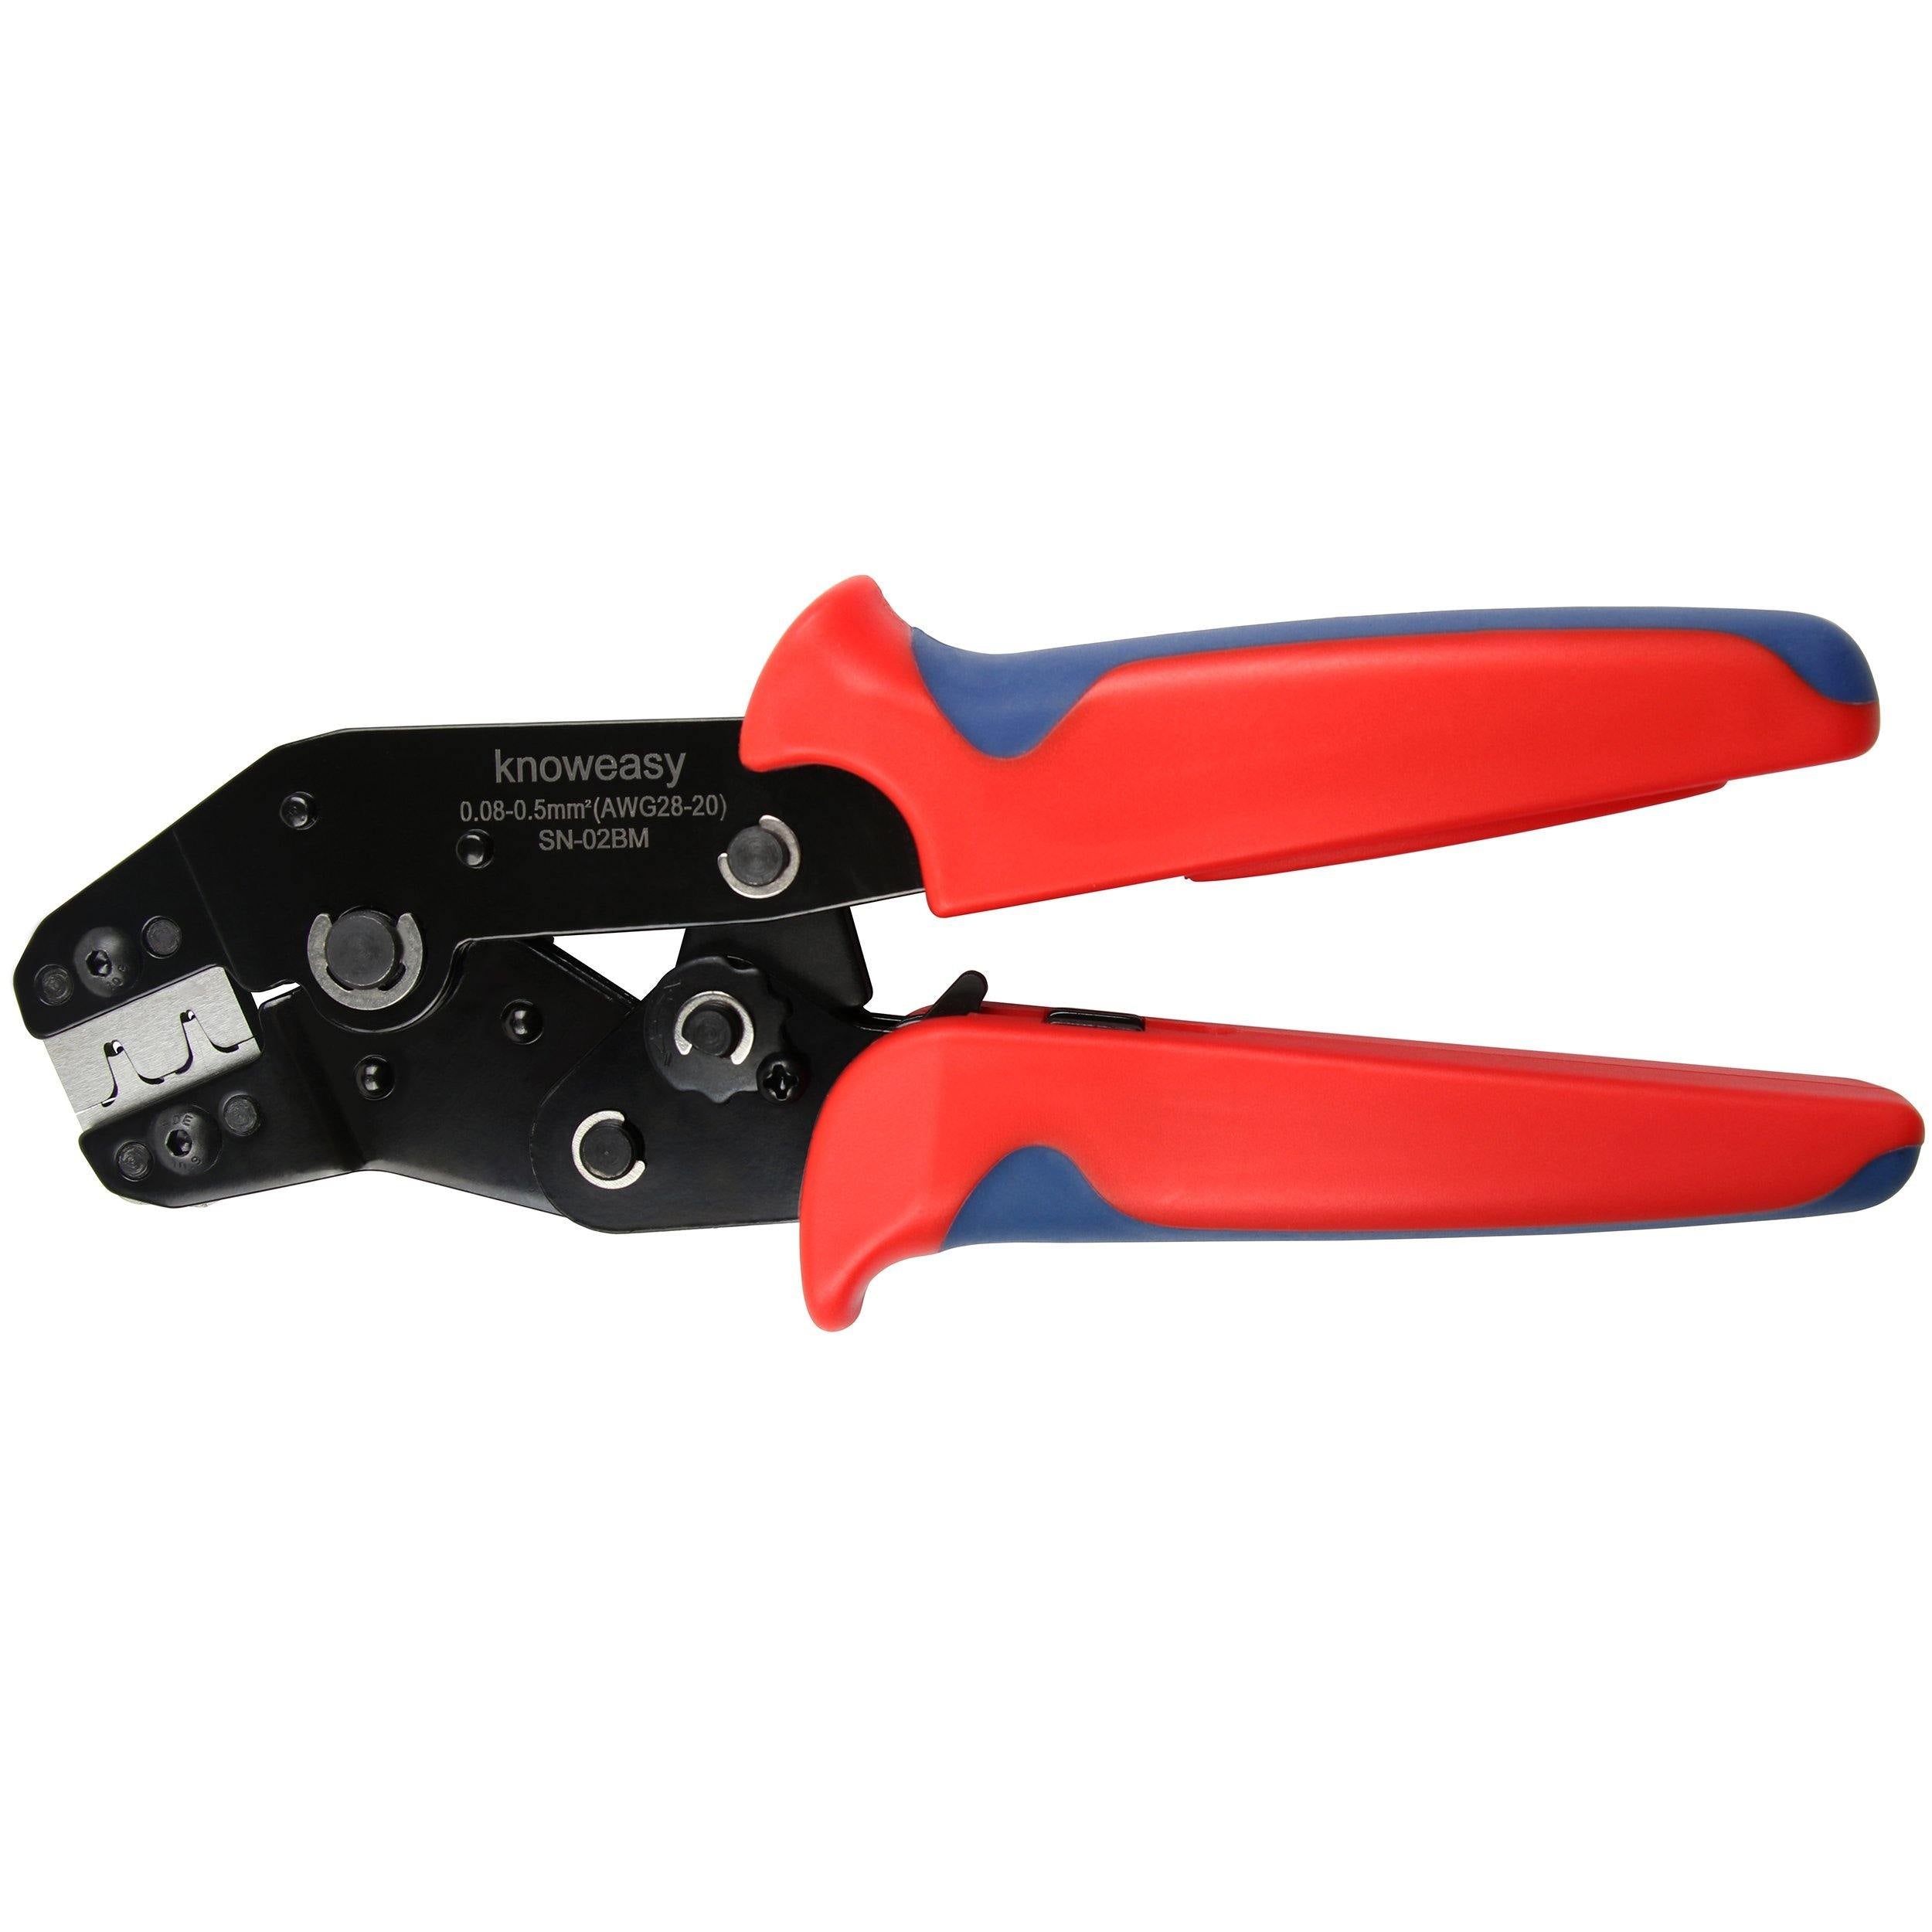 Micro Connector Pin Crimping Tool,Knoweasy Pin Crimper and Jst Crimp for  D-Sub,Open Barrel suits Molex,JST,JAE,32-20AWG /0.03-0.52mm²